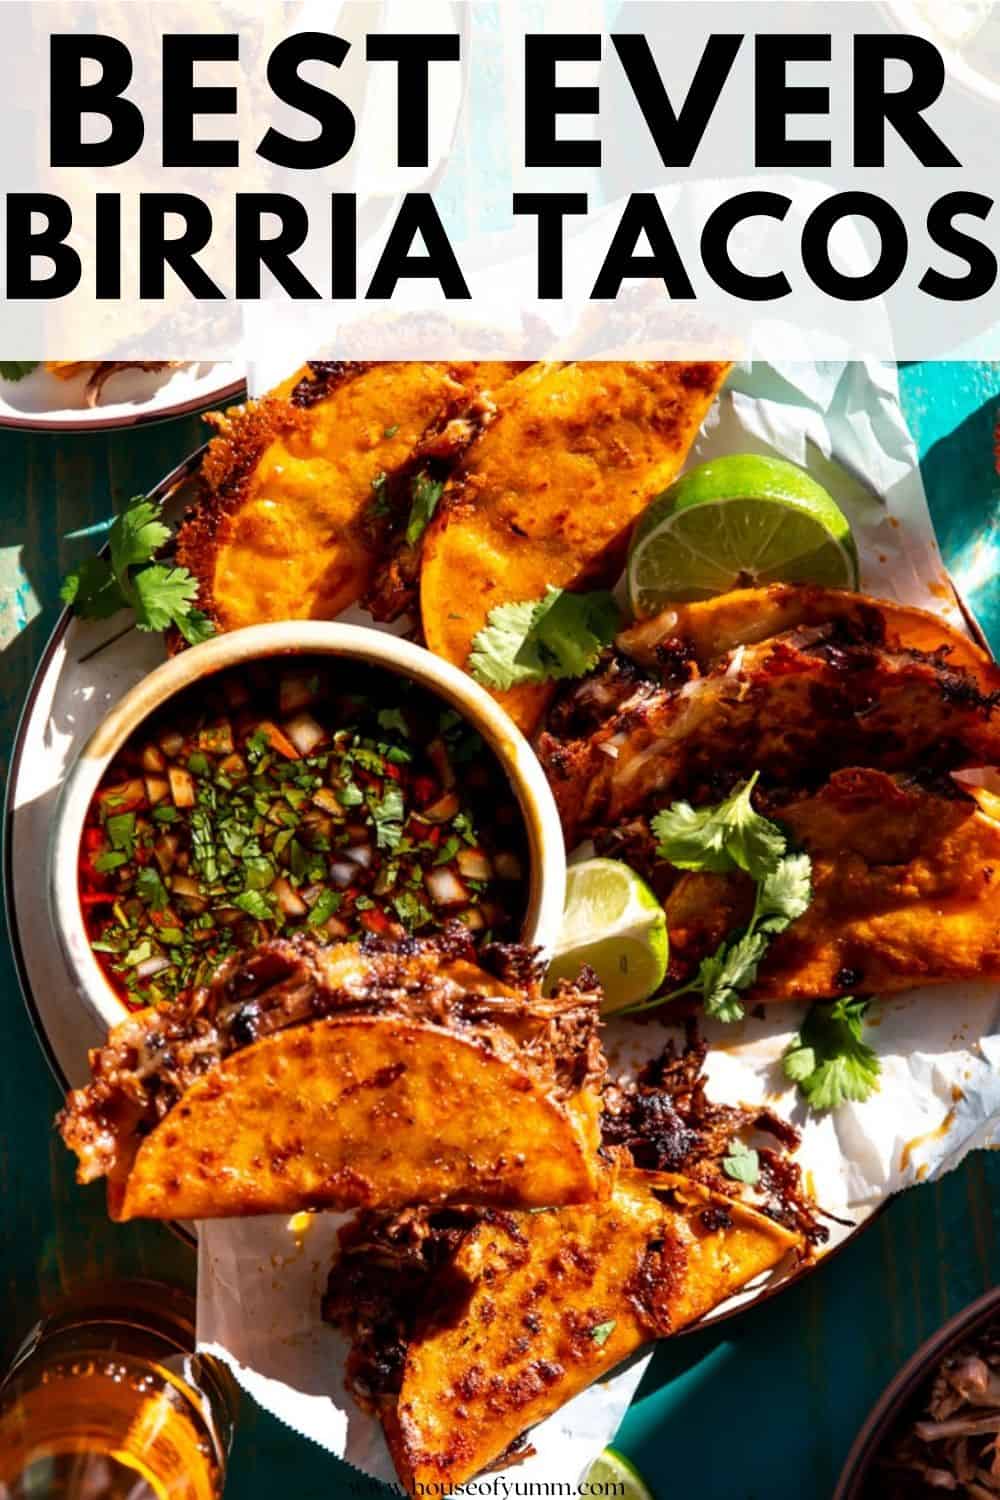 Birria tacos with text.